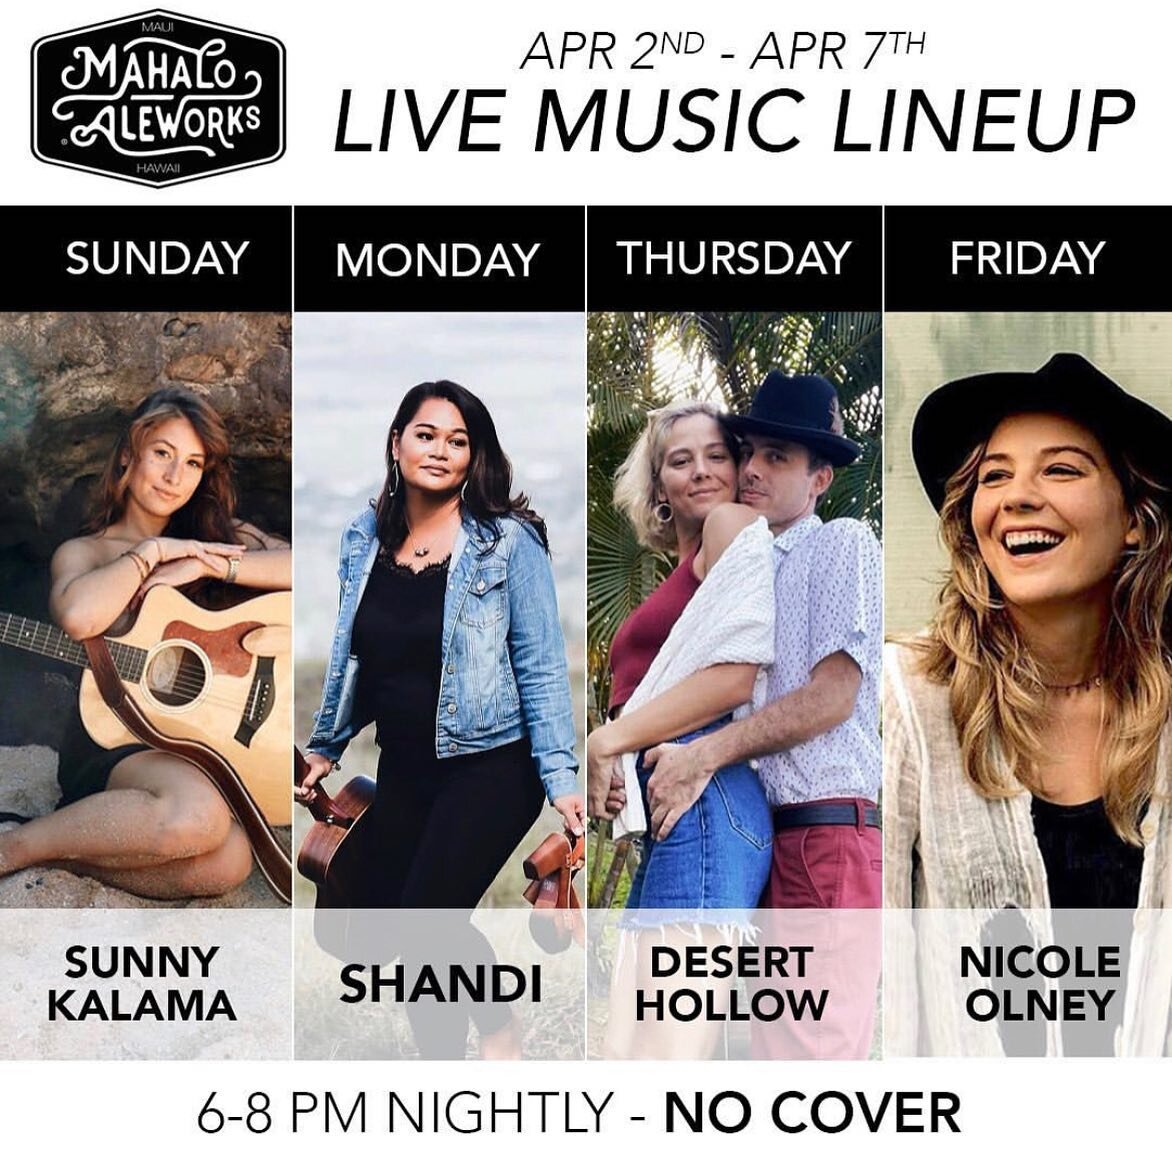 The music lineup this week @mahaloaleworks is AWESOME!!
No cover! From 6-8pm! 
Music, beer, sausages and smashburgers.... does it get any better? 
Don&rsquo;t forget that upstairs @mahaloaleworks is the best place on island to watch the sunset! #life